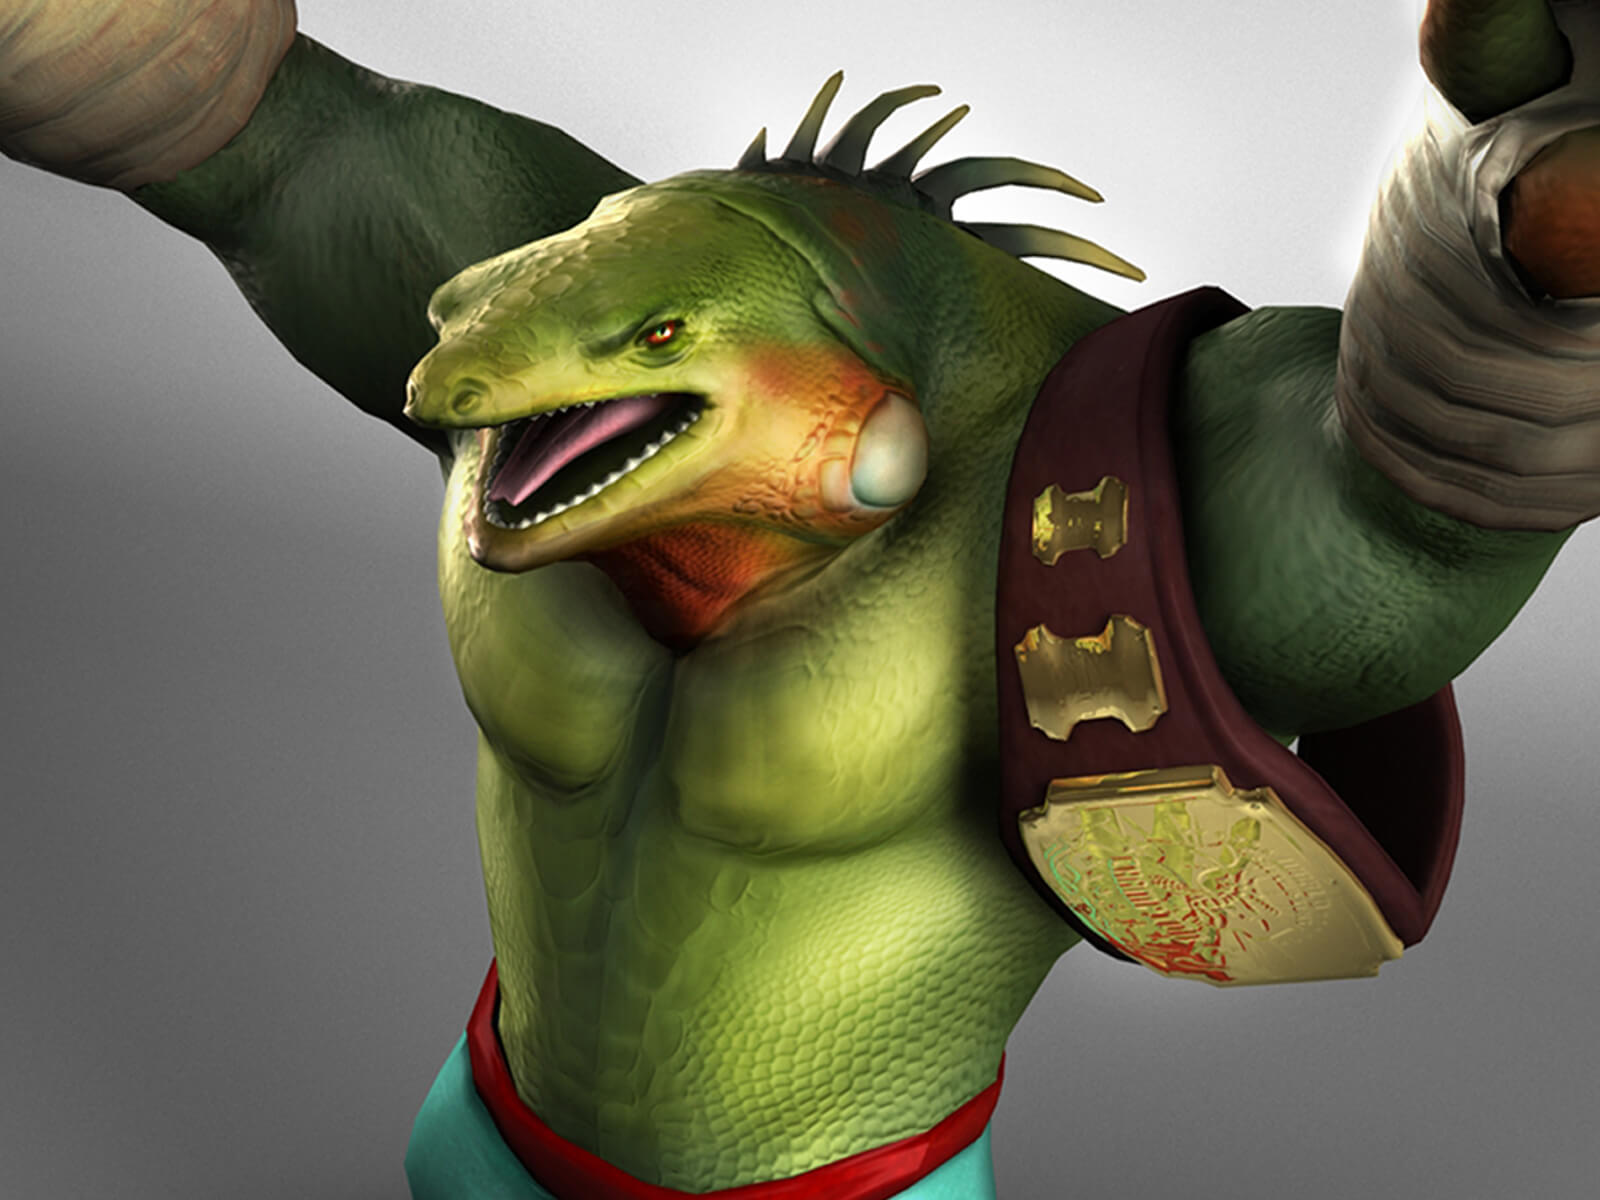 computer-generated 3D model of a muscular lizard with bandaged wrists and a championship belt slung around its shoulder